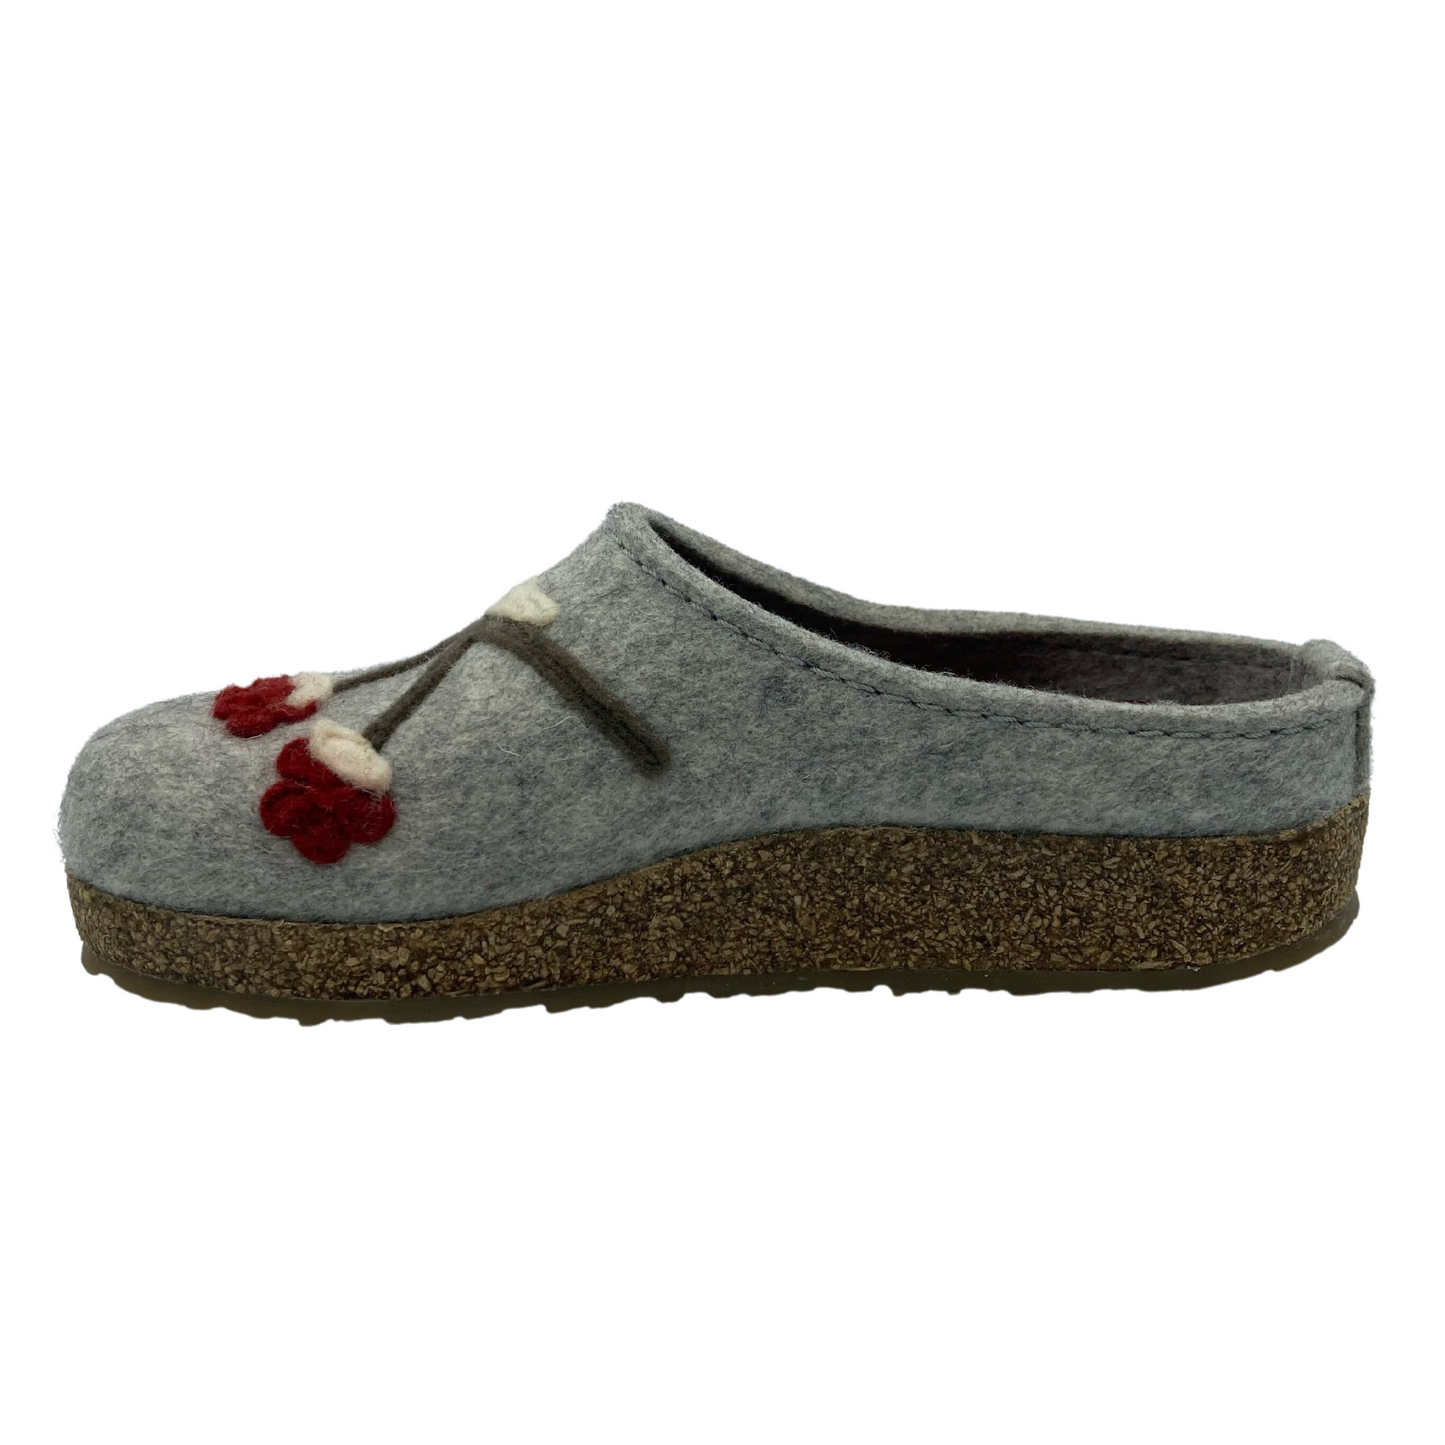 Left facing view of grey wool felt clog slipper with cork outsole